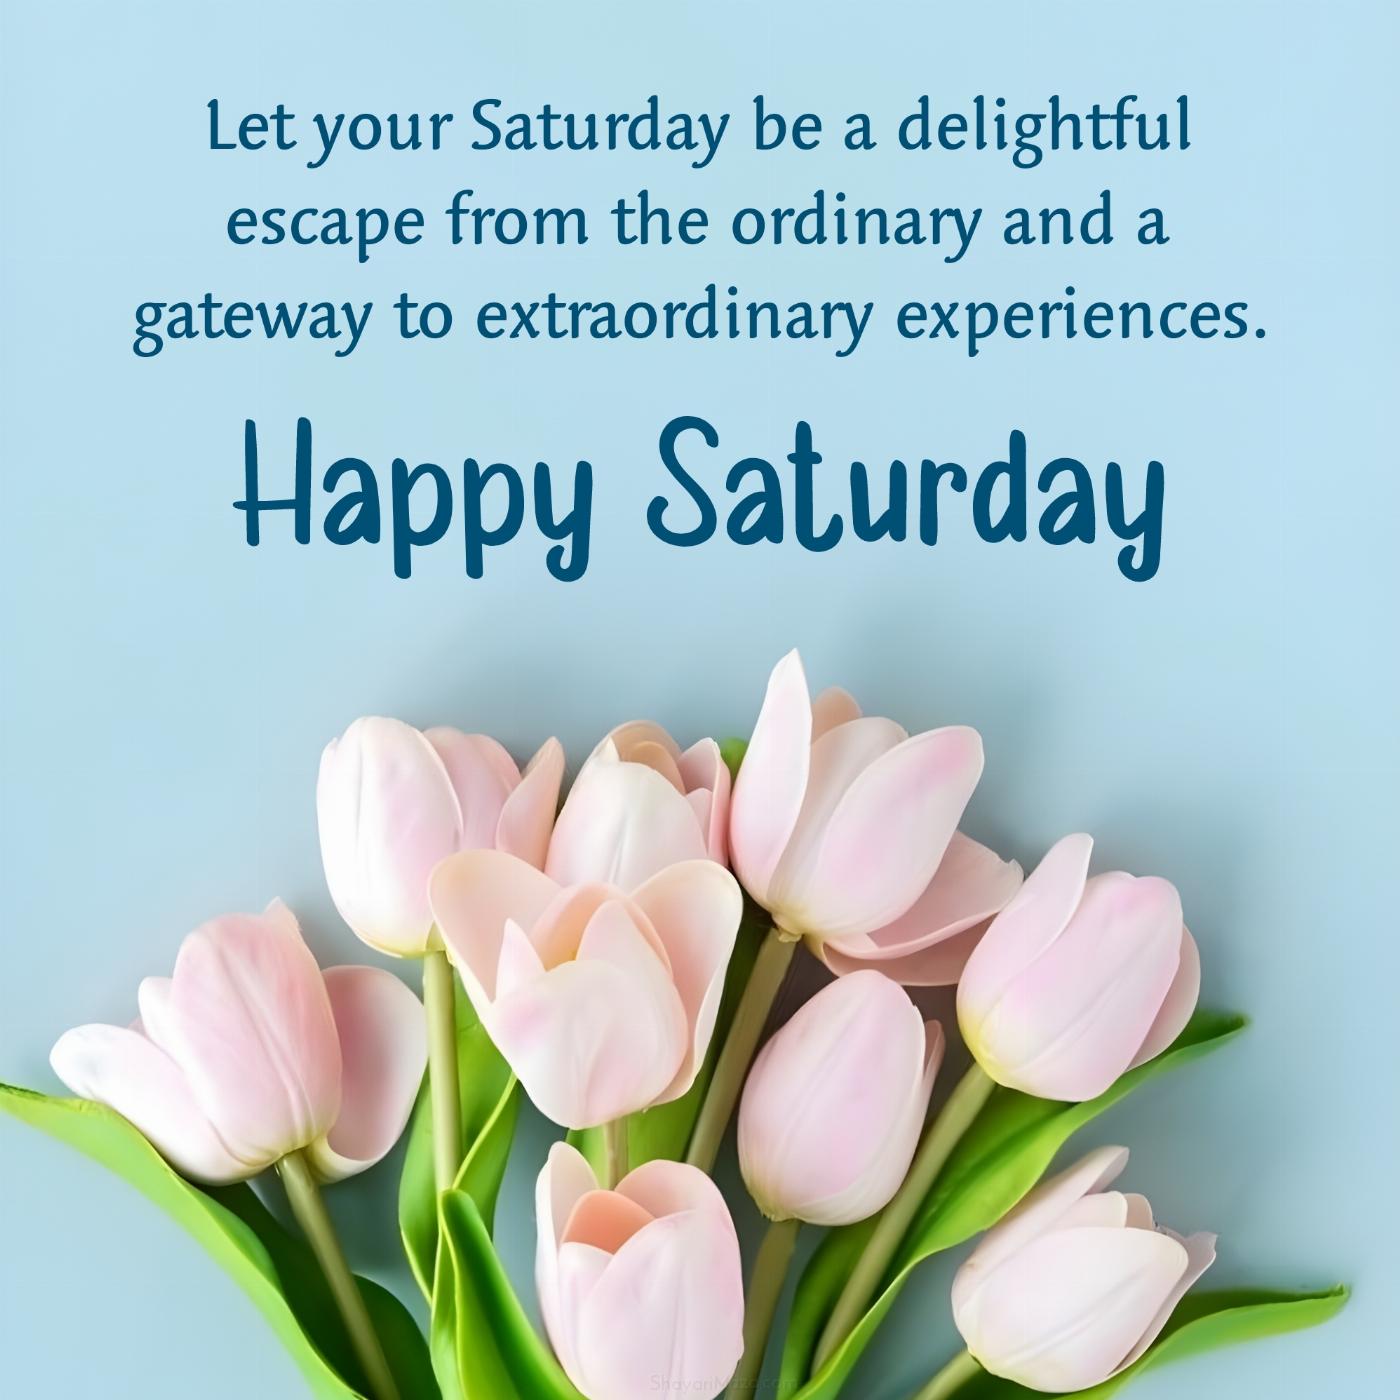 Let your Saturday be a delightful escape from the ordinary